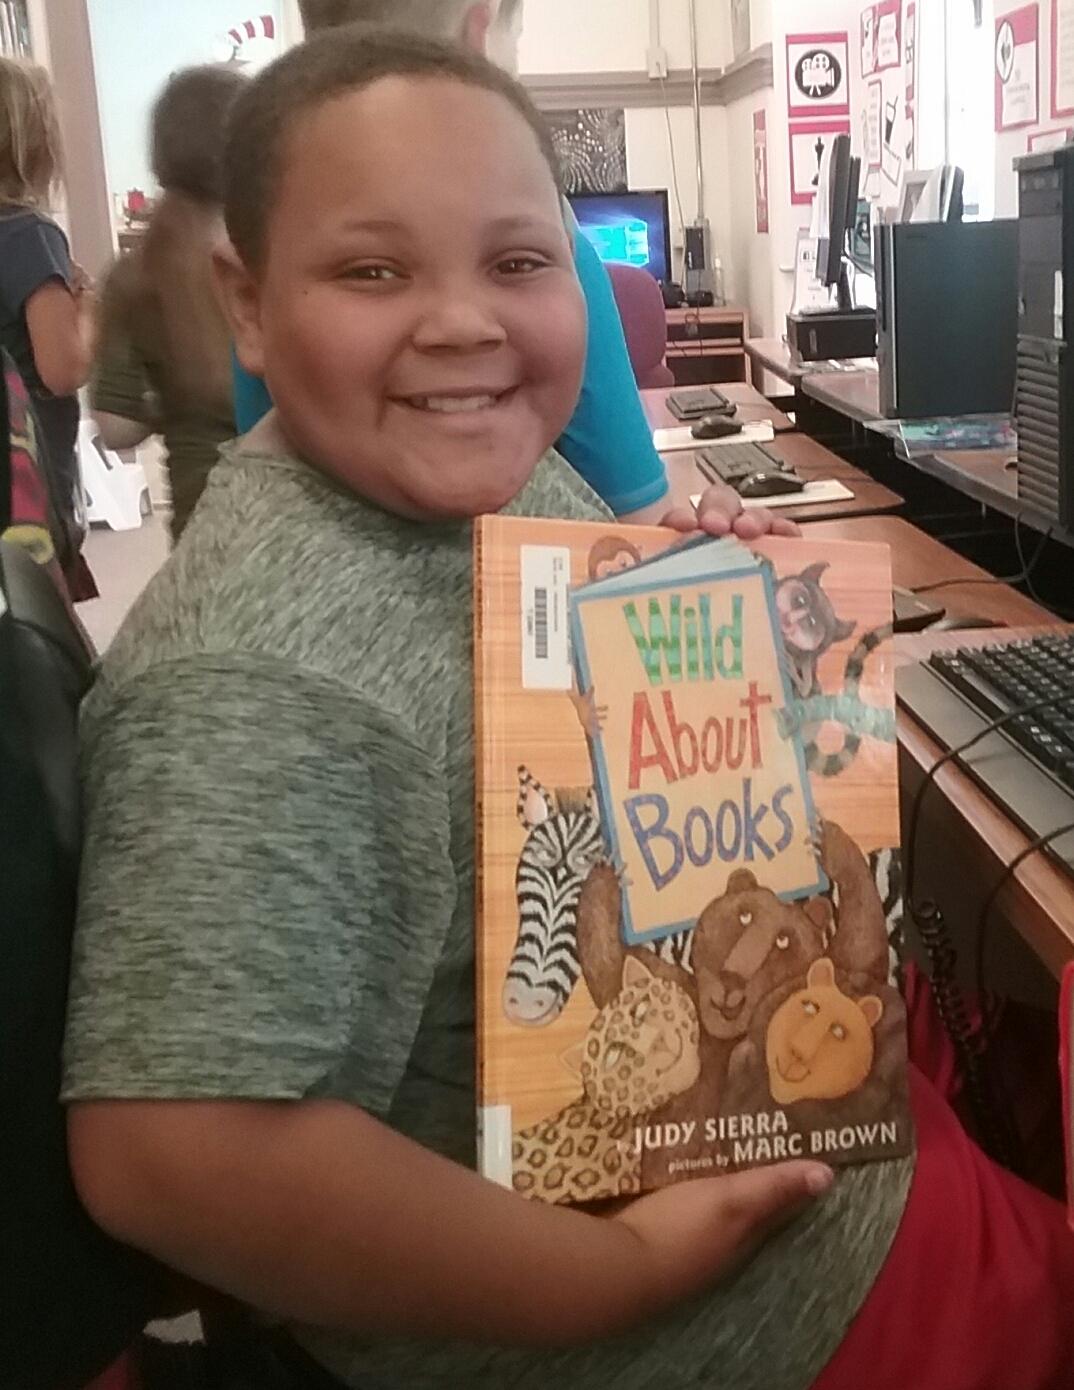 Student showing the book Wild About Books